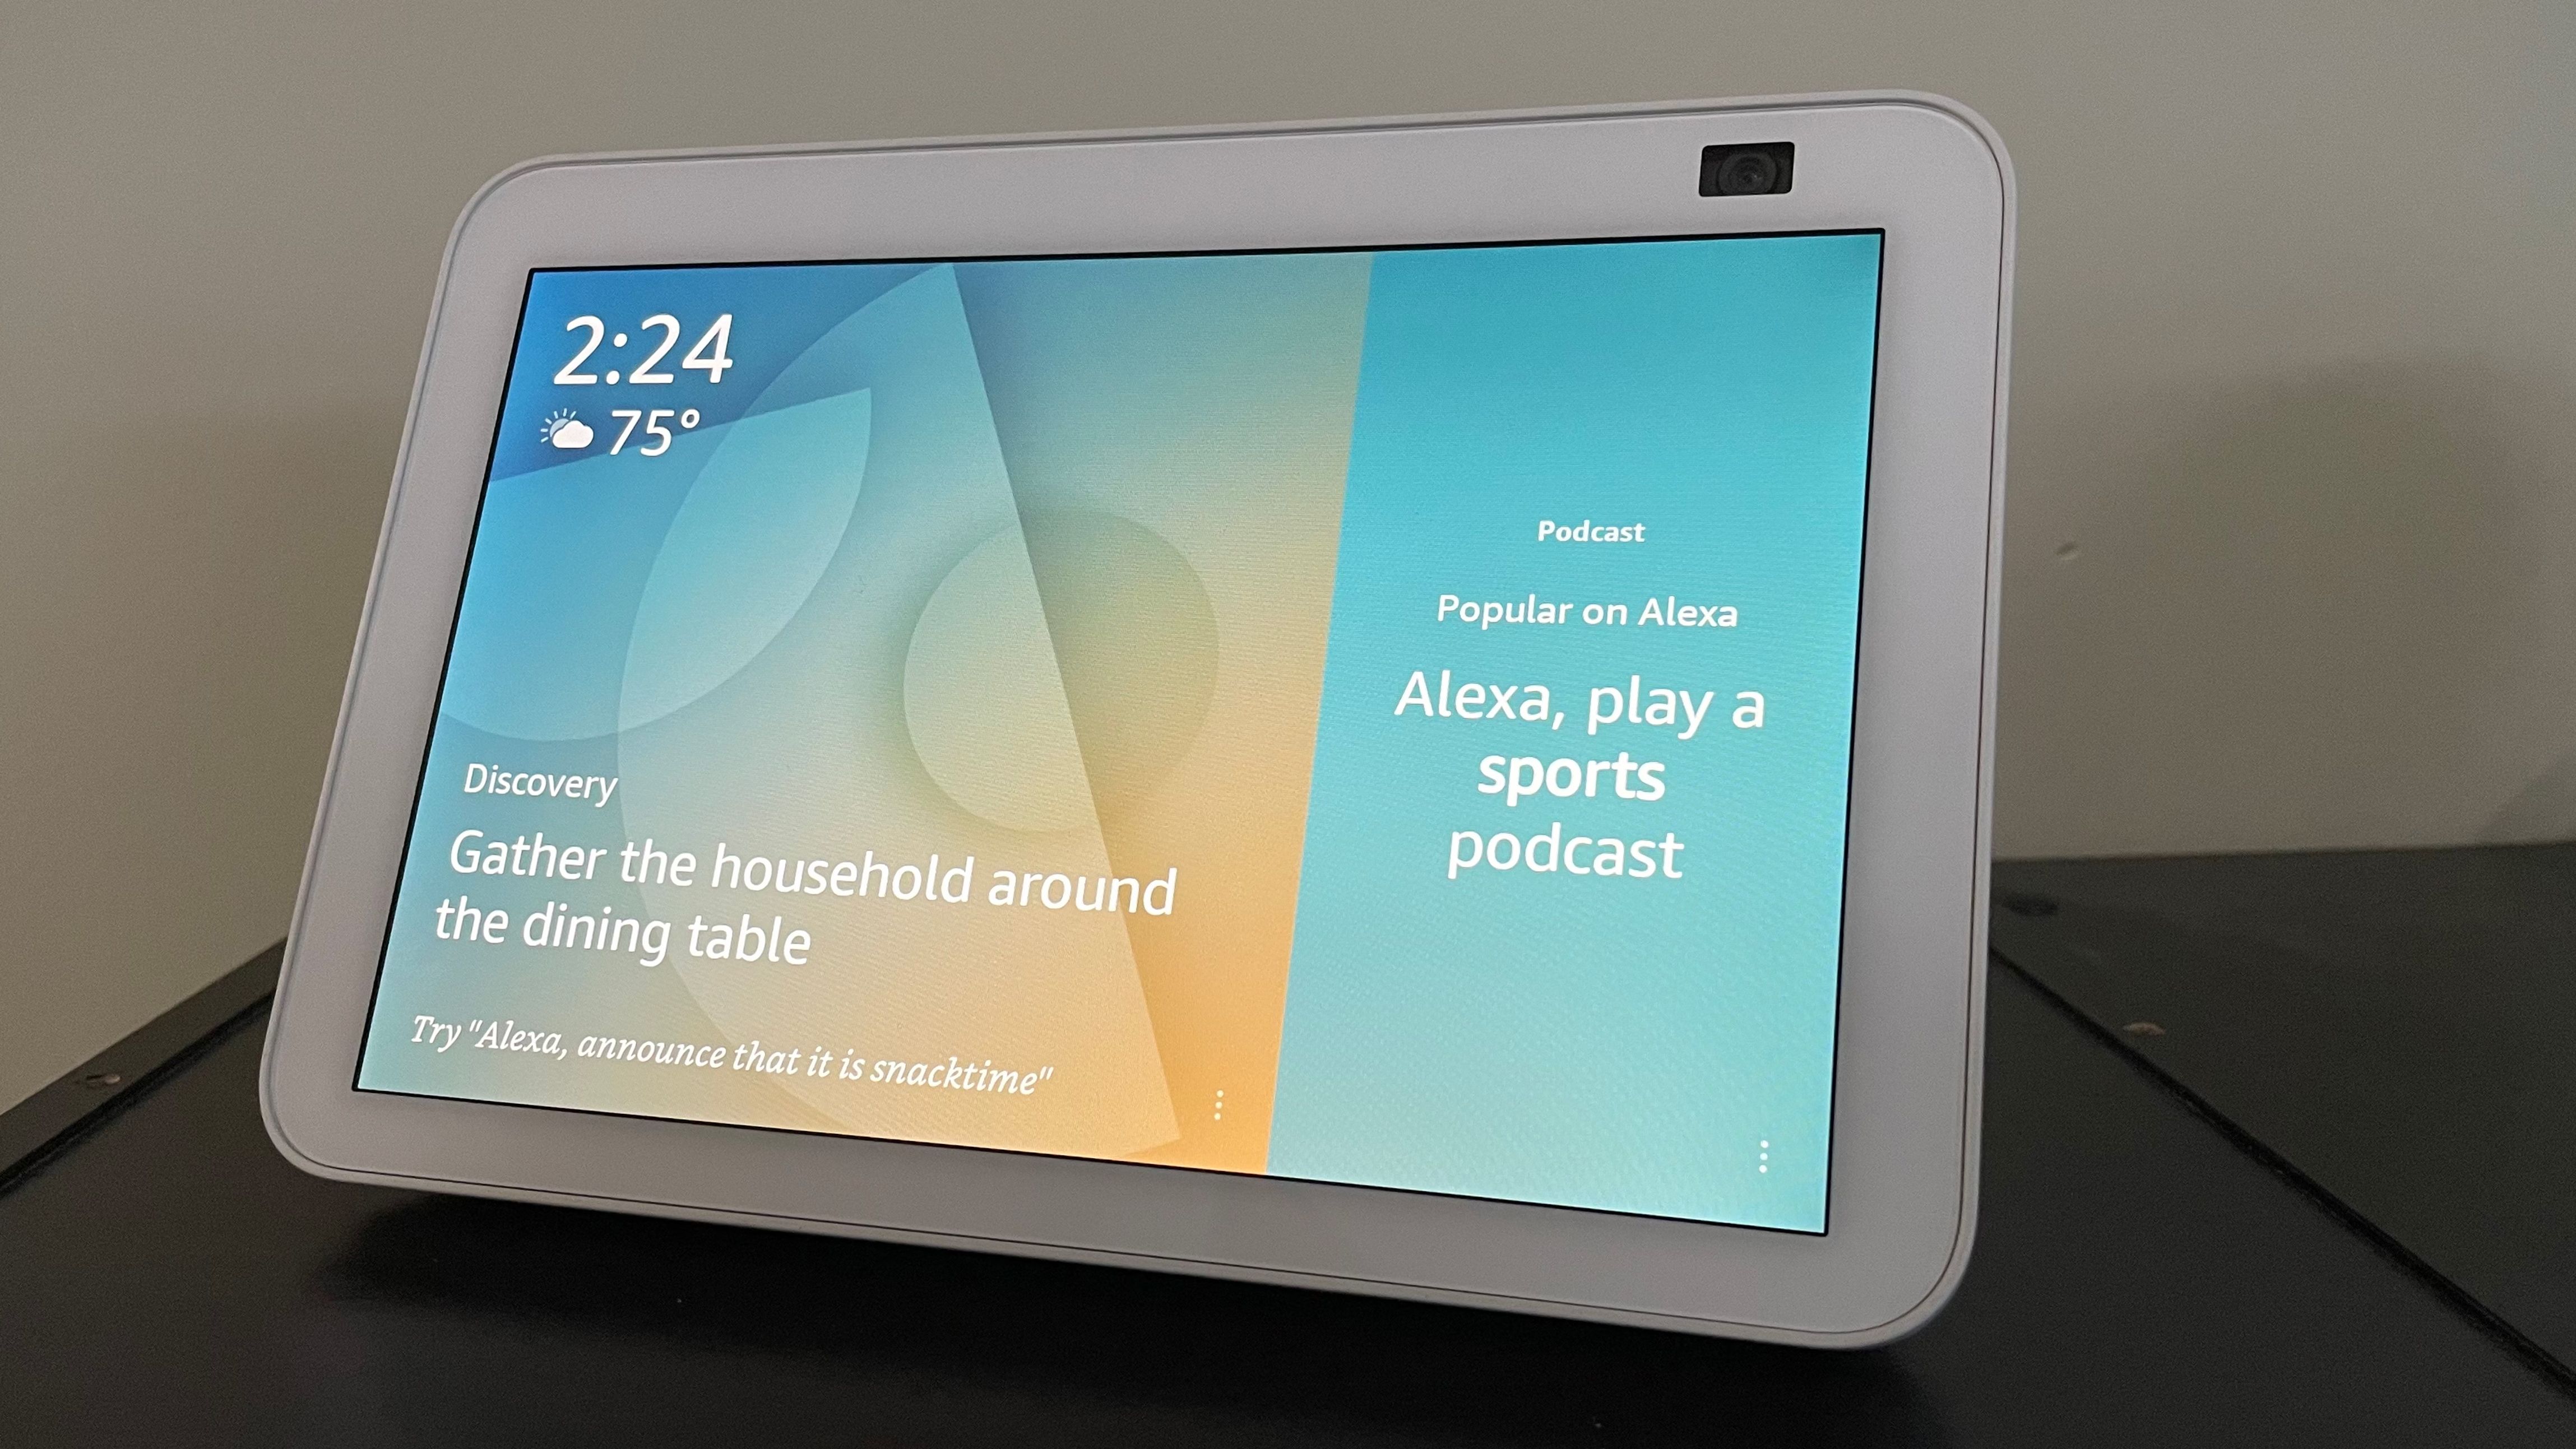 Echo Show 8 (2nd Gen) - White in the Smart Speakers & Displays  department at